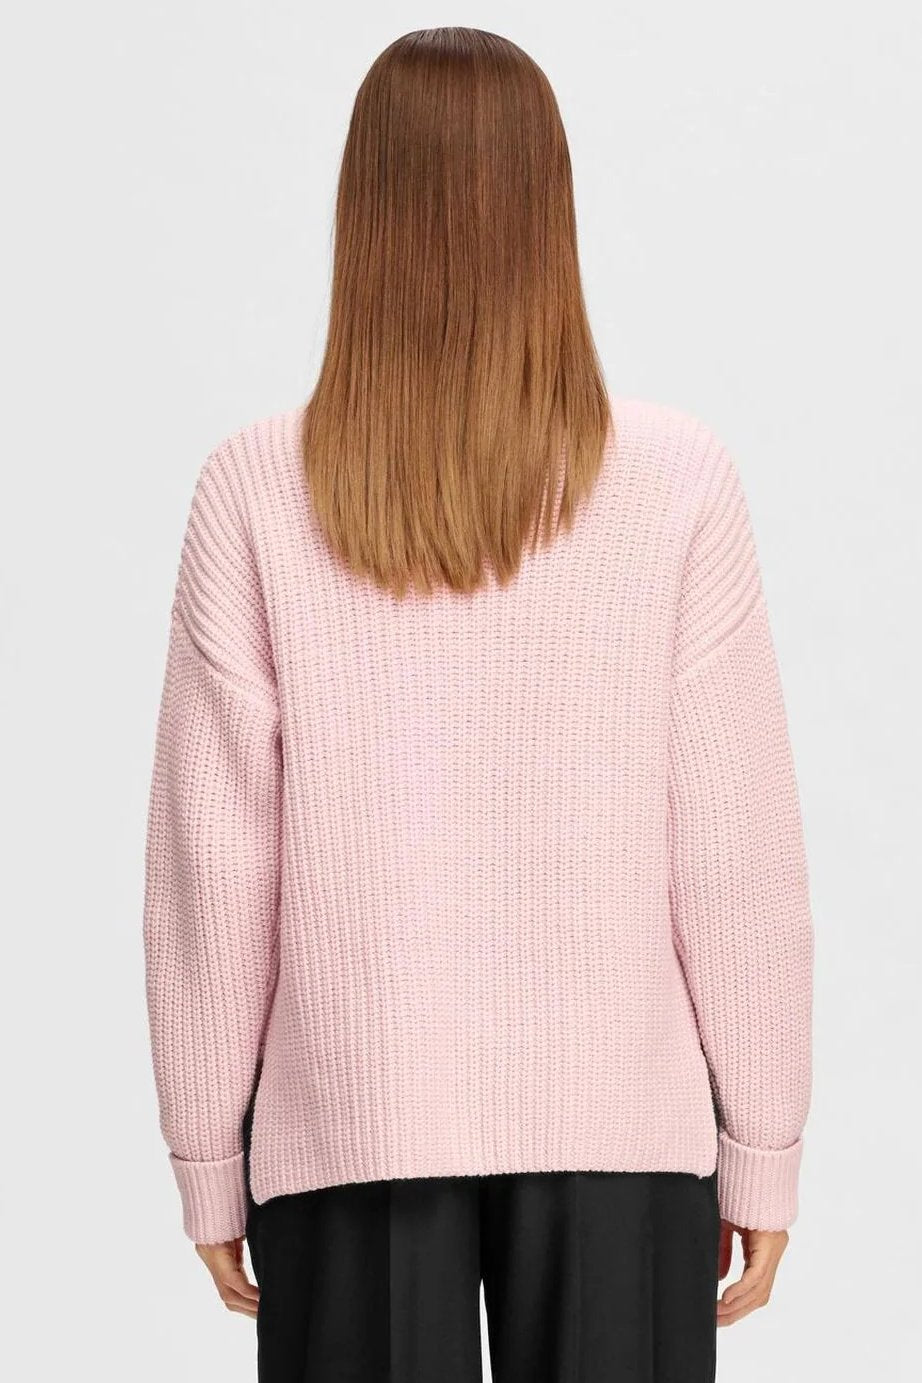 Selected Femme | Sweater | Selma LS Knit Pullover, cradle pink